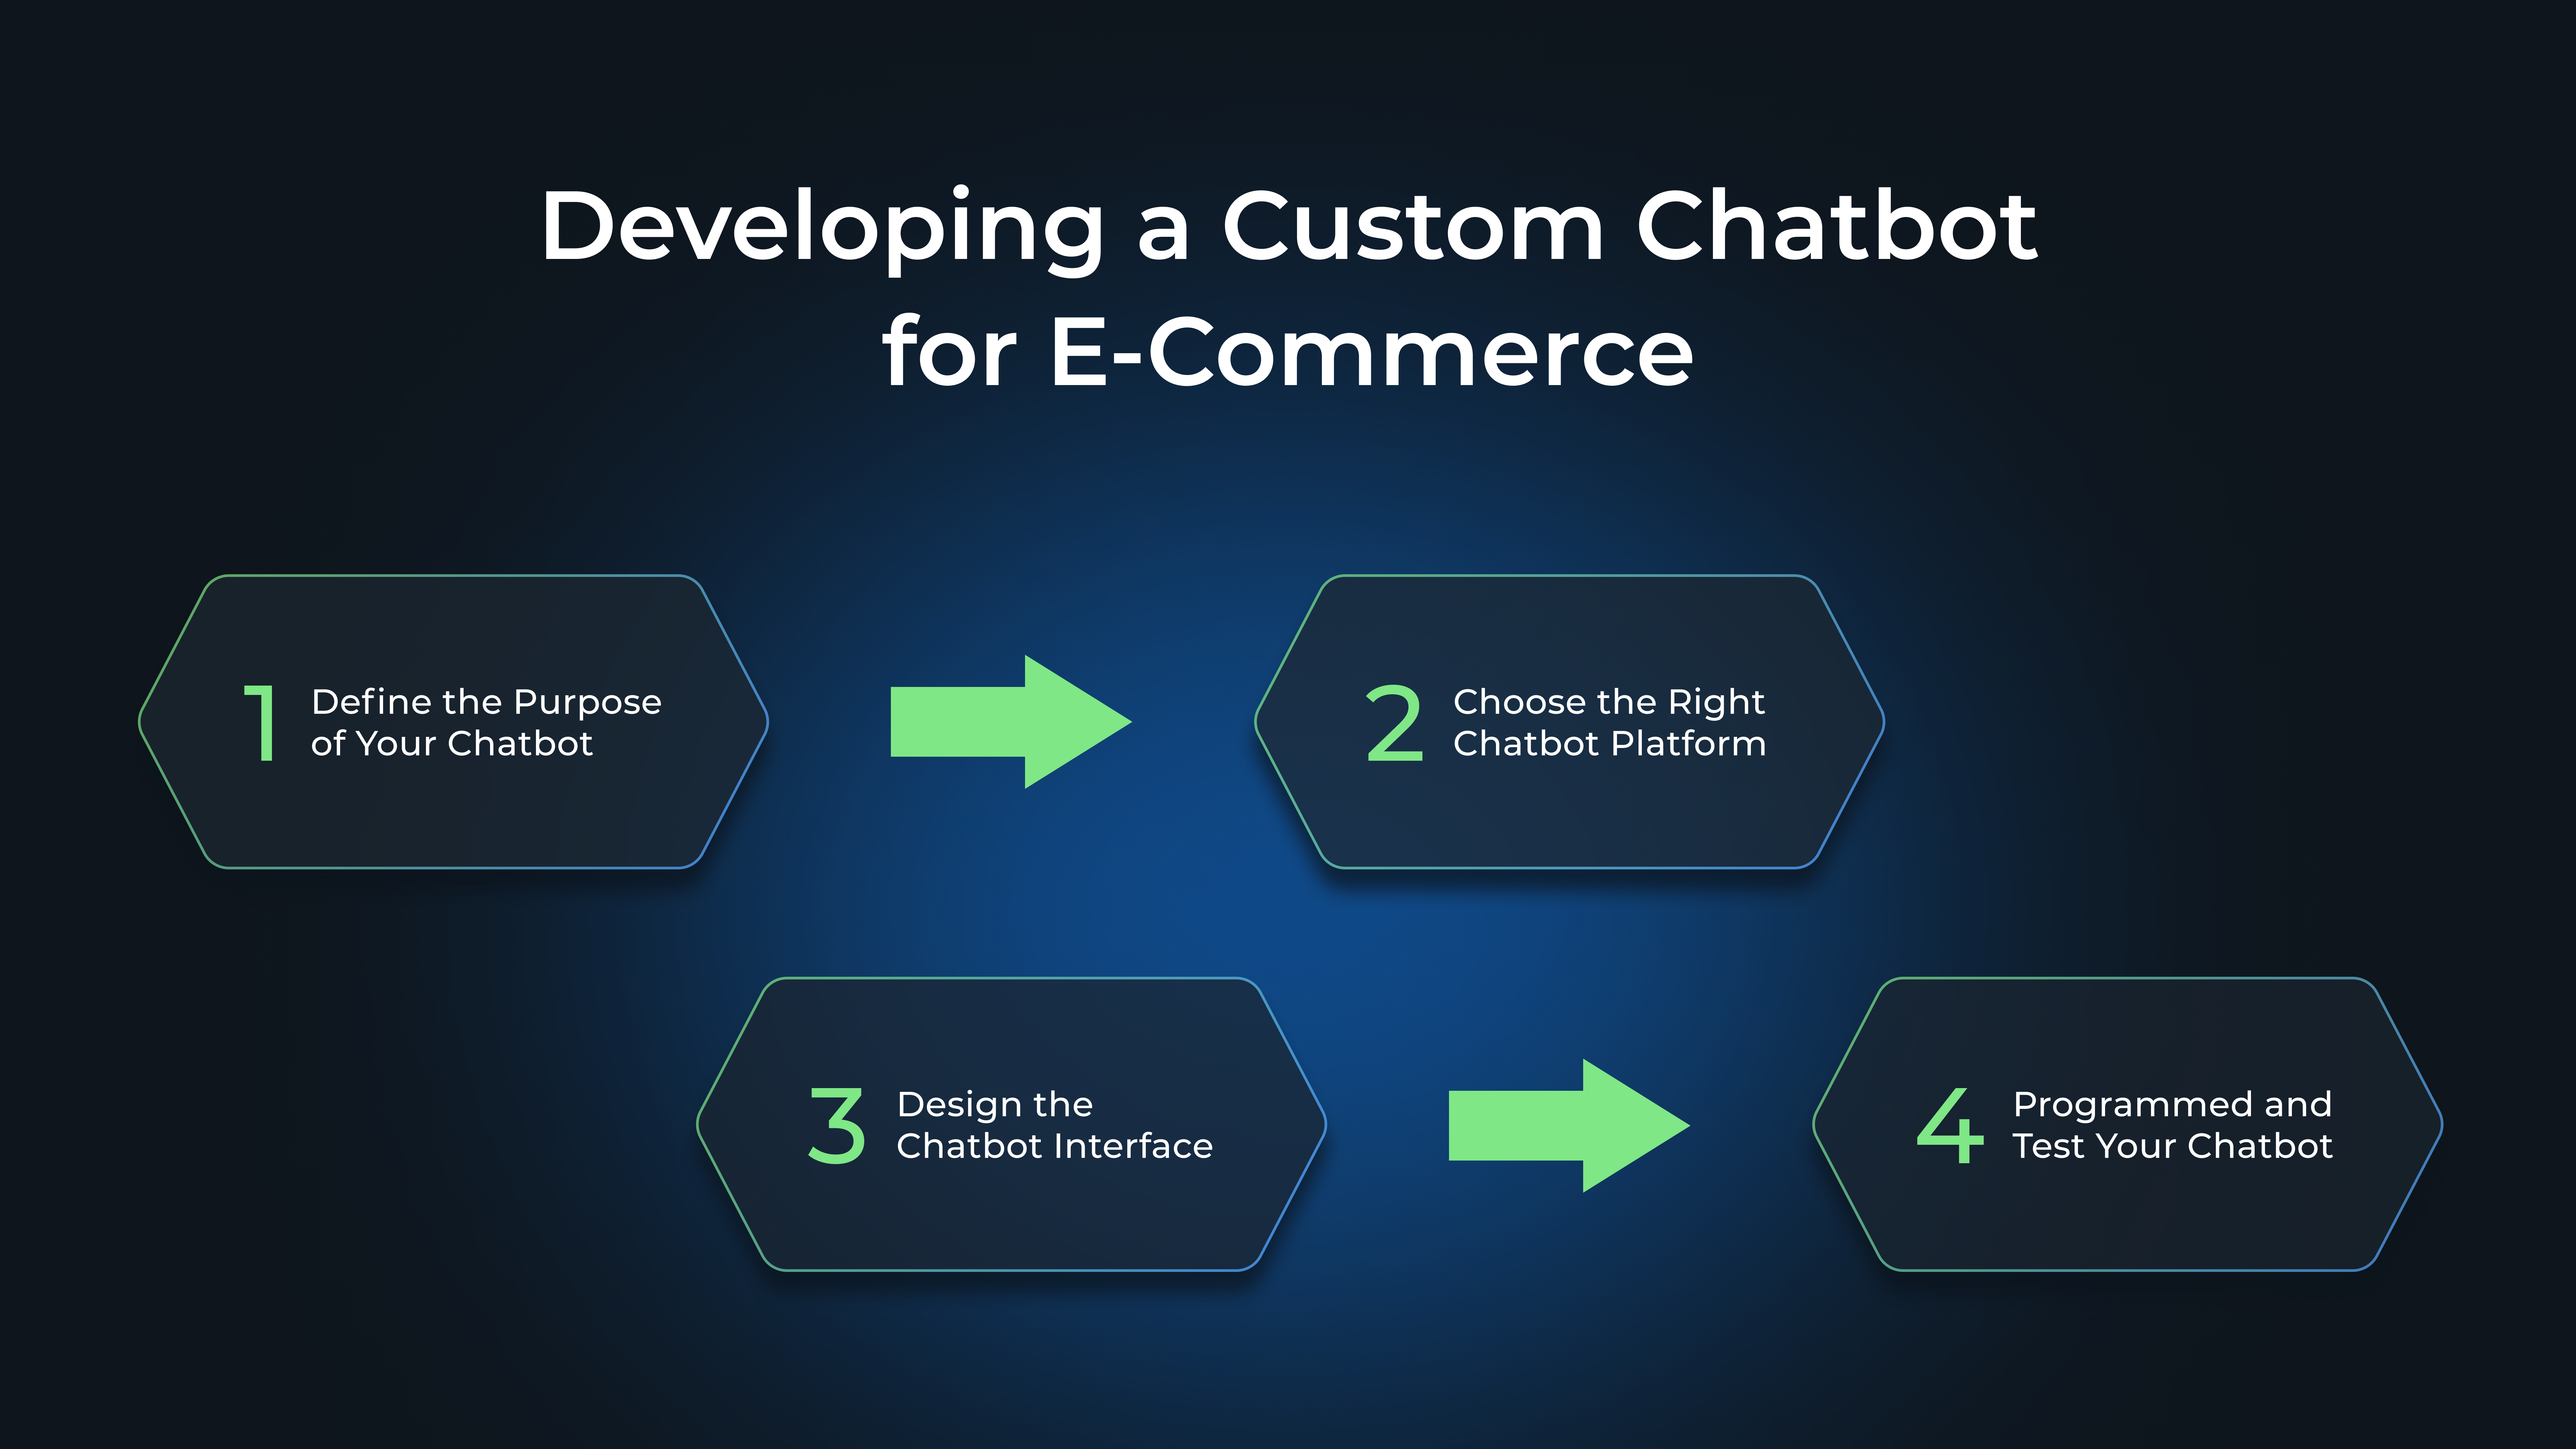 Developing a Custom Chatbot for E-Commerce: Step-by-Step: Define the Purpose of Your Chatbot, Сhoose the Right Chatbot Platform, Design the Chatbot Interface, Programme and Test Your Chatbot
